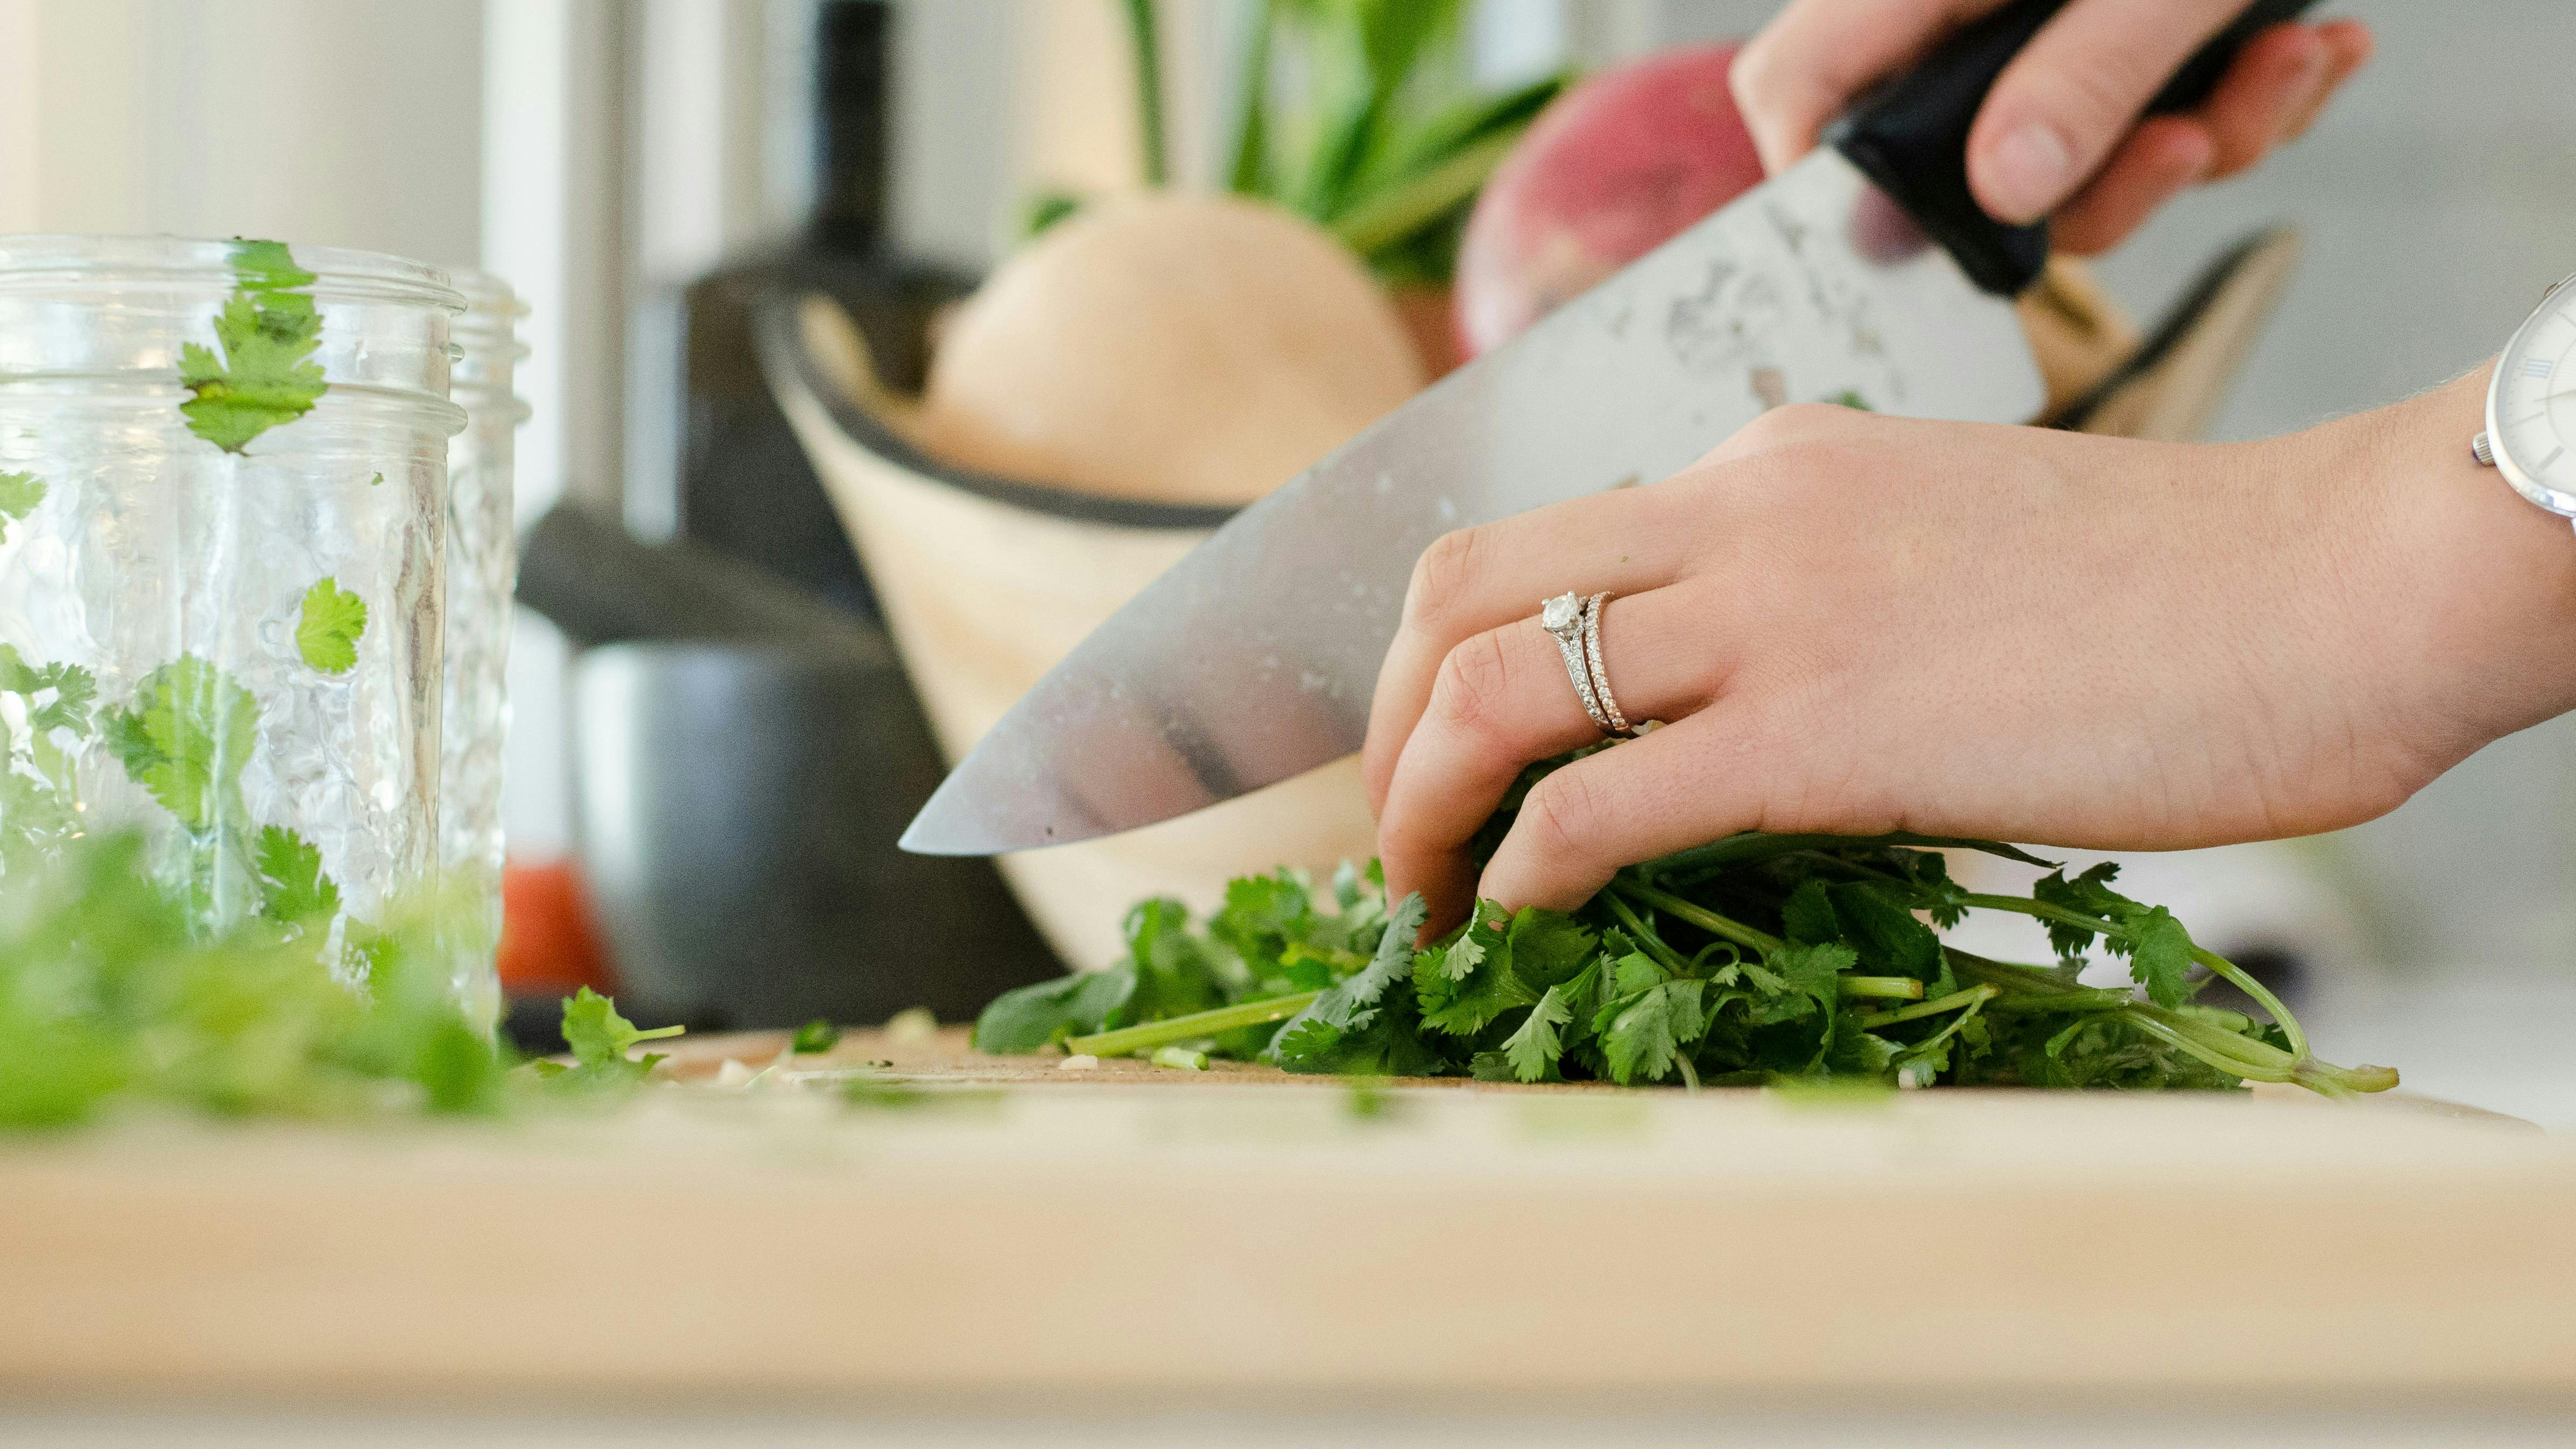 Slicing herbs with a chef's knife.